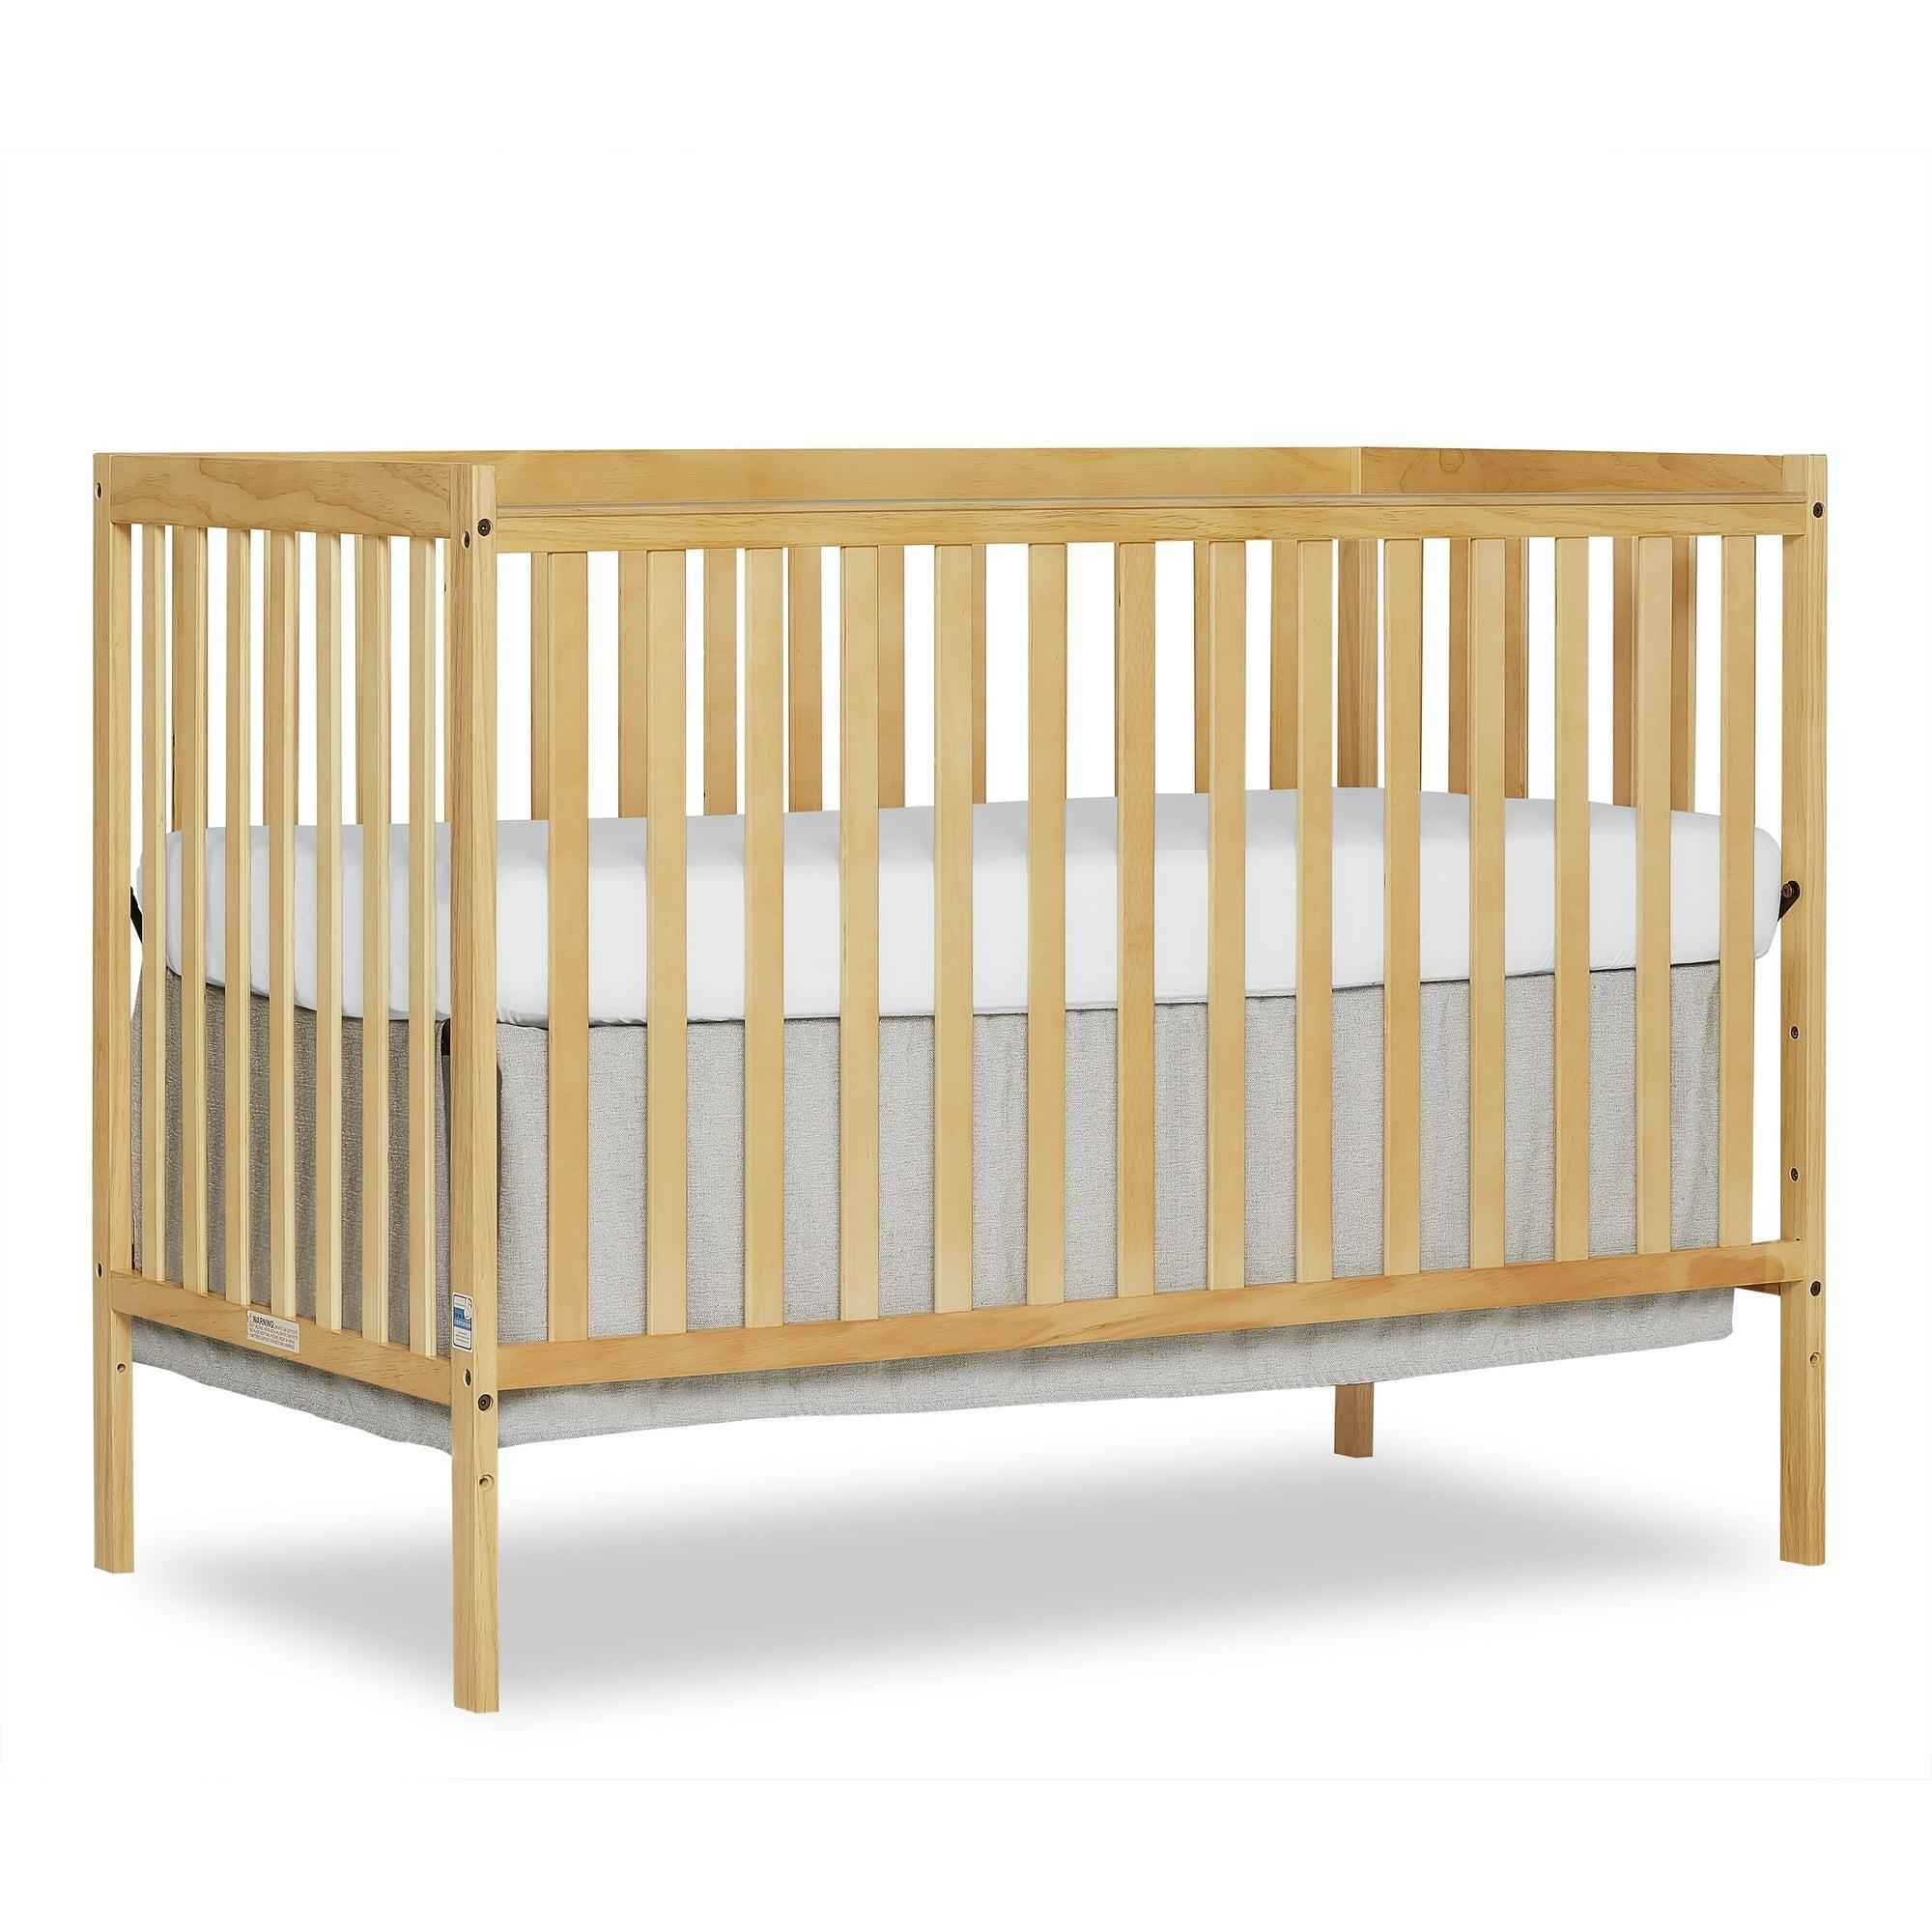 🆓🚛 5-in-1 Convertible Crib, Converts From Baby Crib To Toddler Bed, Fits Standard Full-Size Crib Mattress, Easy To Assemble 53X29X9 Inches, Natural